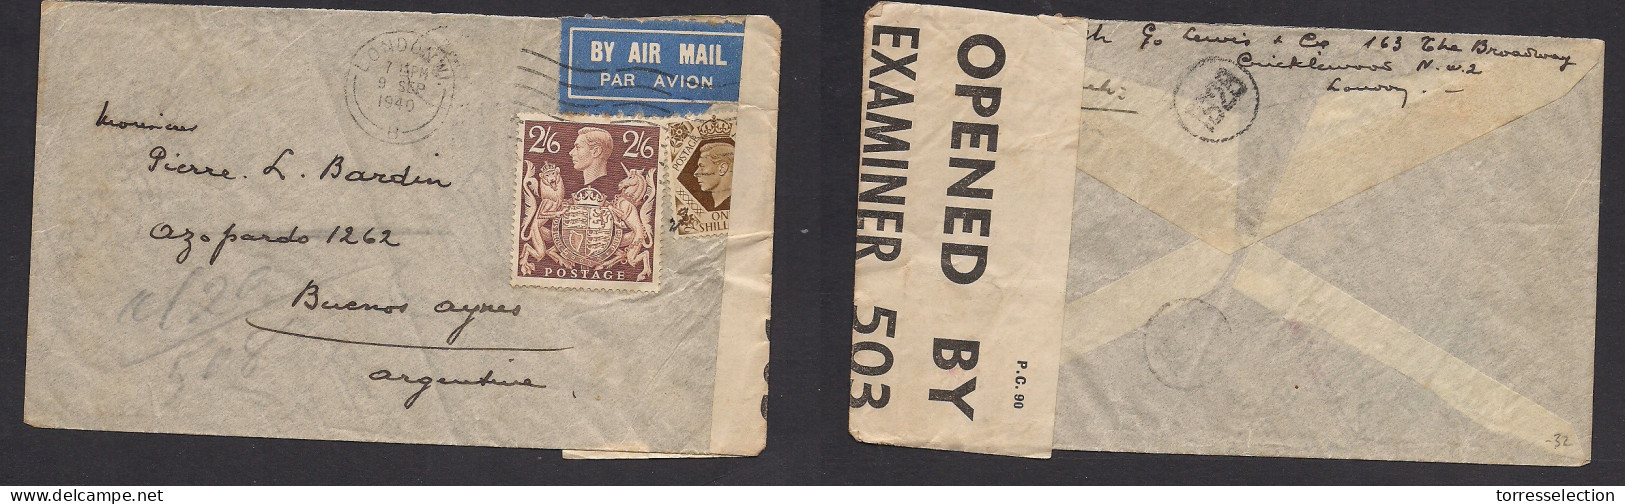 Great Britain - XX. 1940 (6 Sept) London - Argentina, Buenos Aires. Air Multifkd Env Incl 2/6sh. 3sh 6d Rate + Censored. - ...-1840 Prephilately